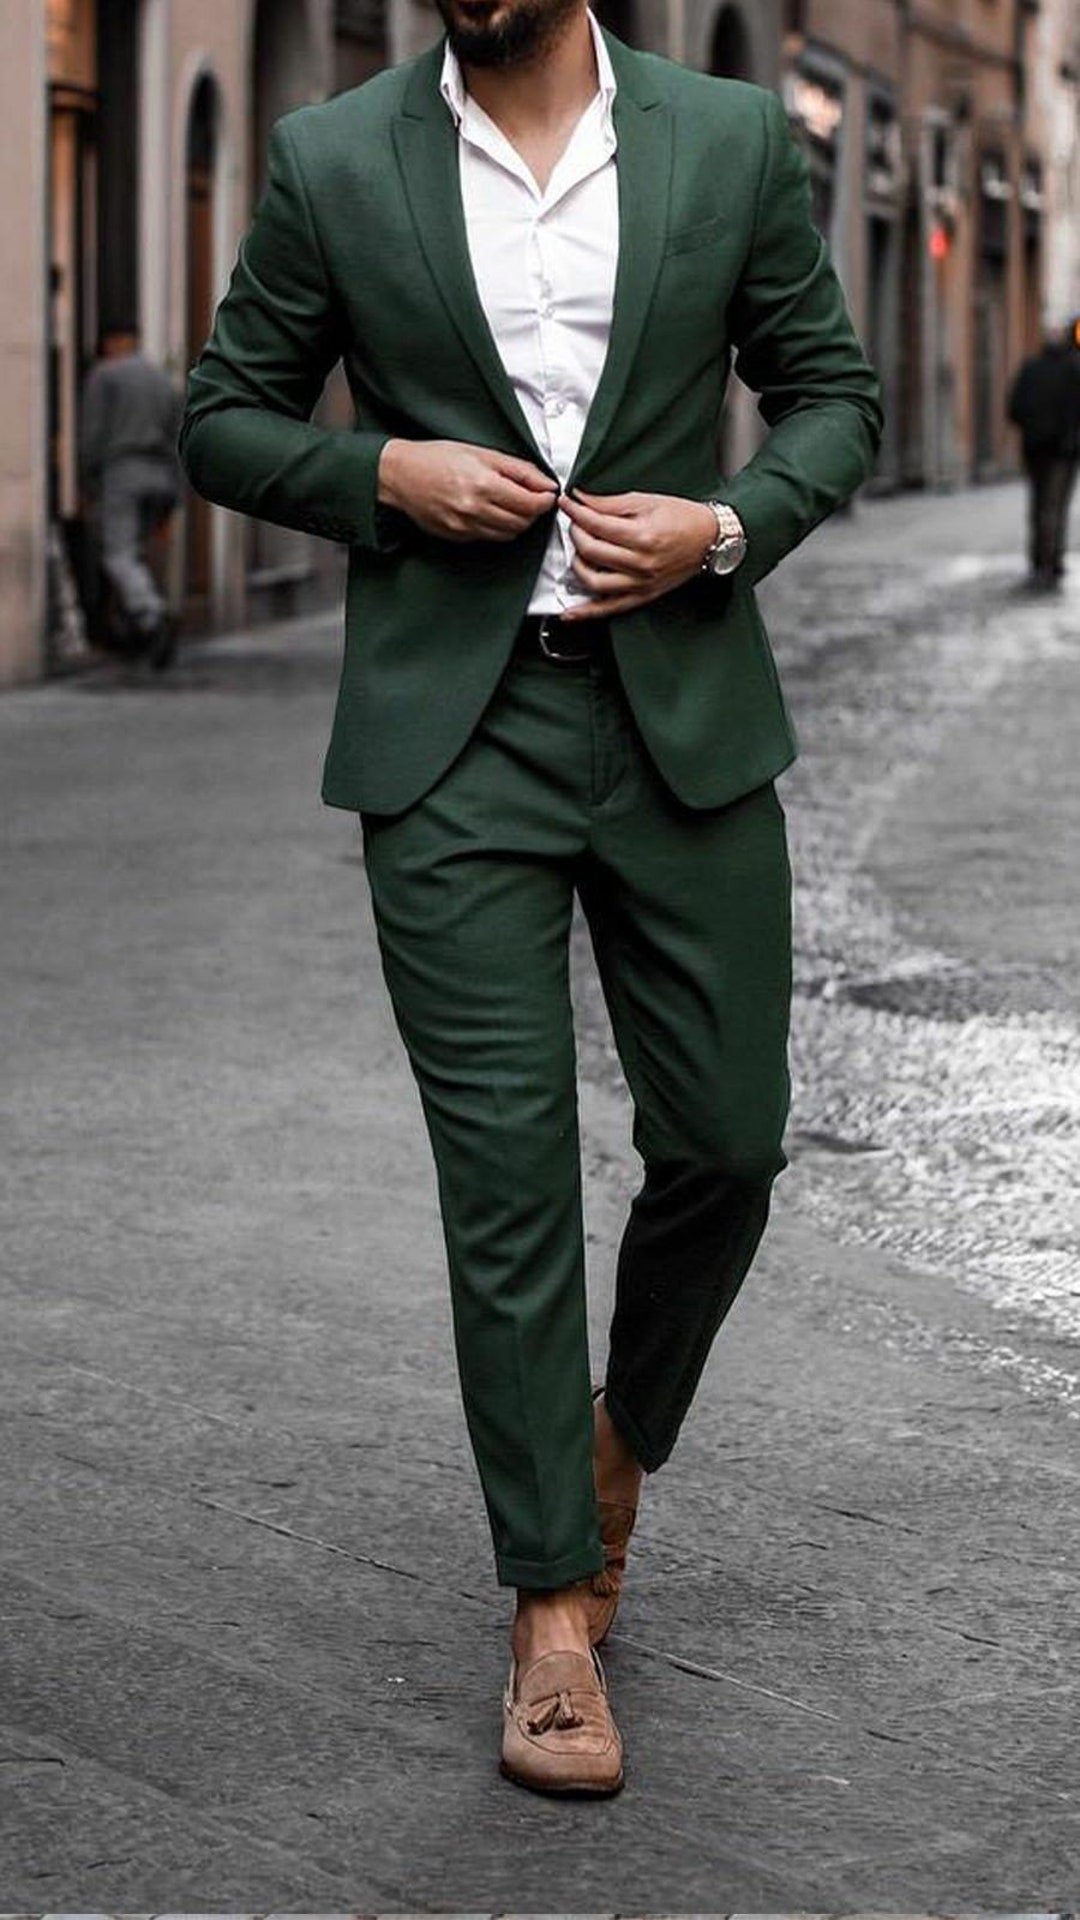 GREEN FORMAL SUIT Elegant Fashion Suit Green Two Piece - Etsy